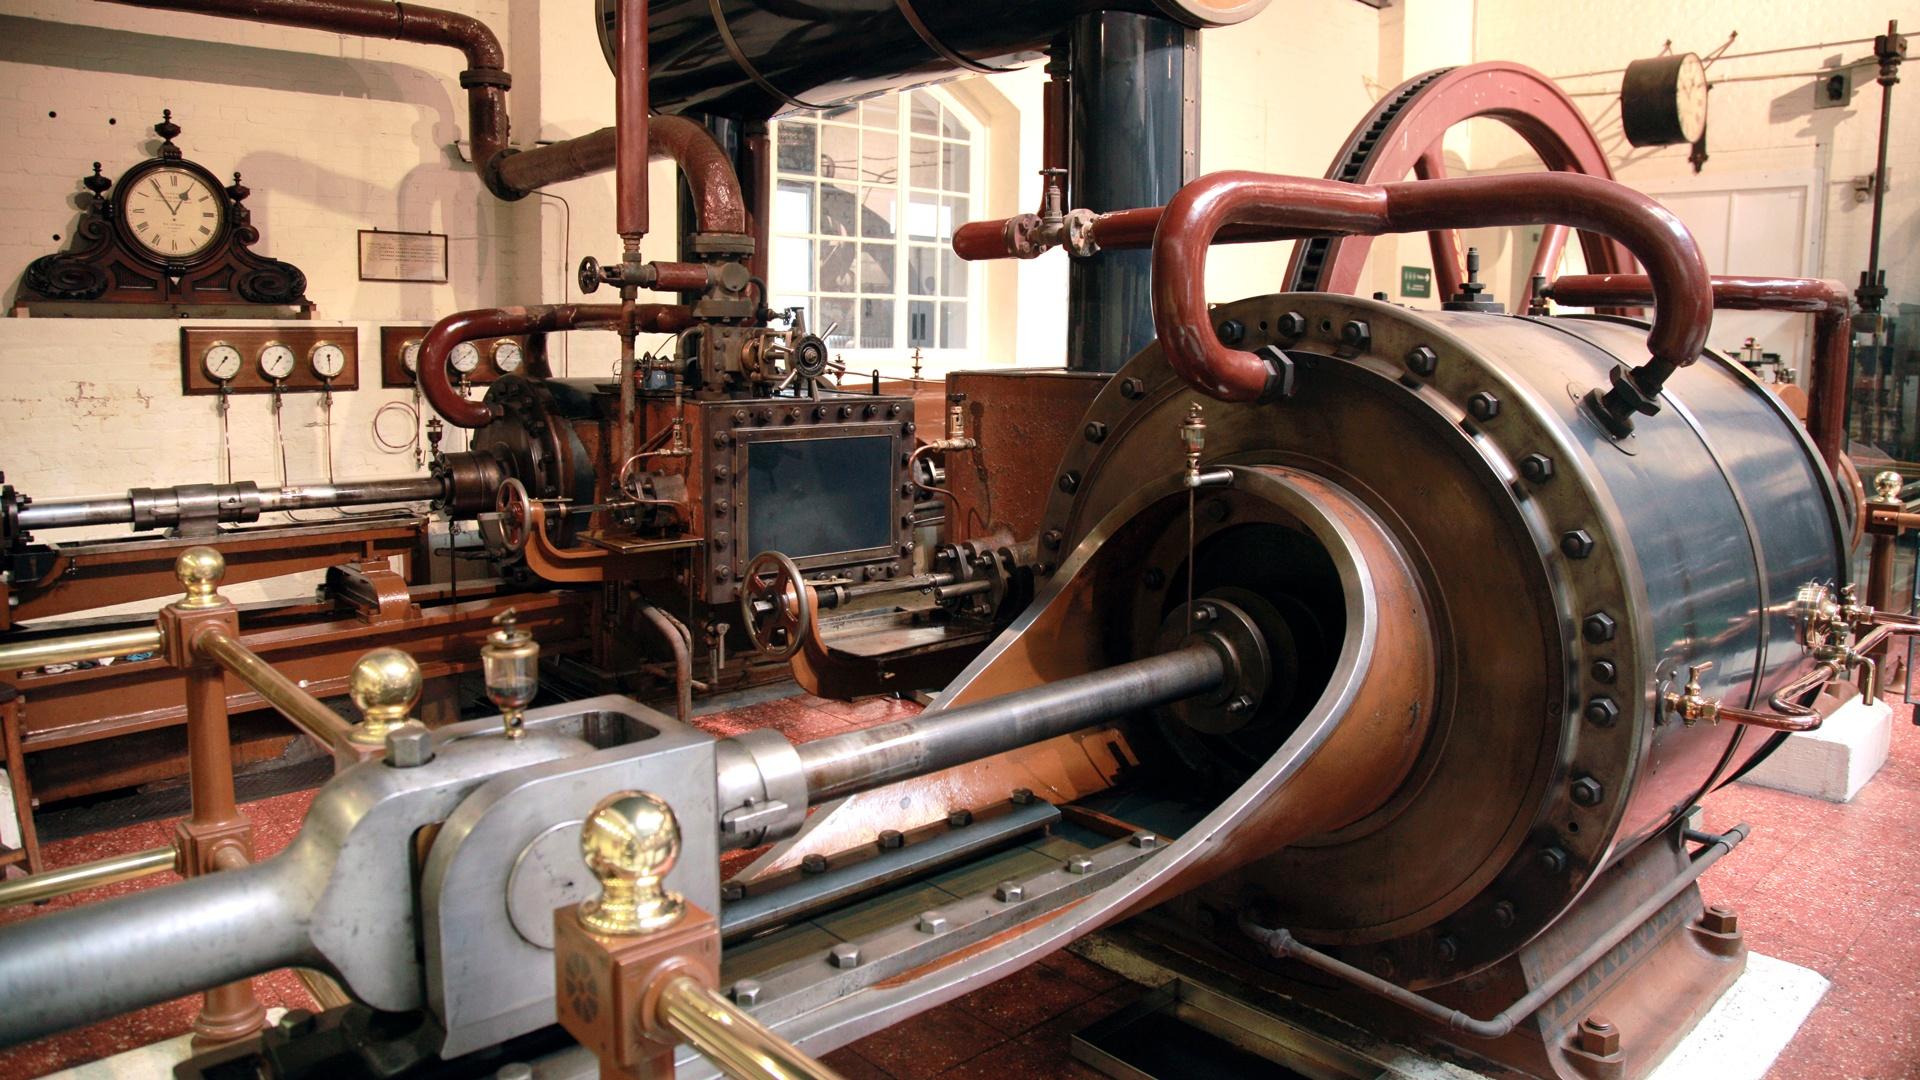 A large steam engine at London Museum of Water & Steam.